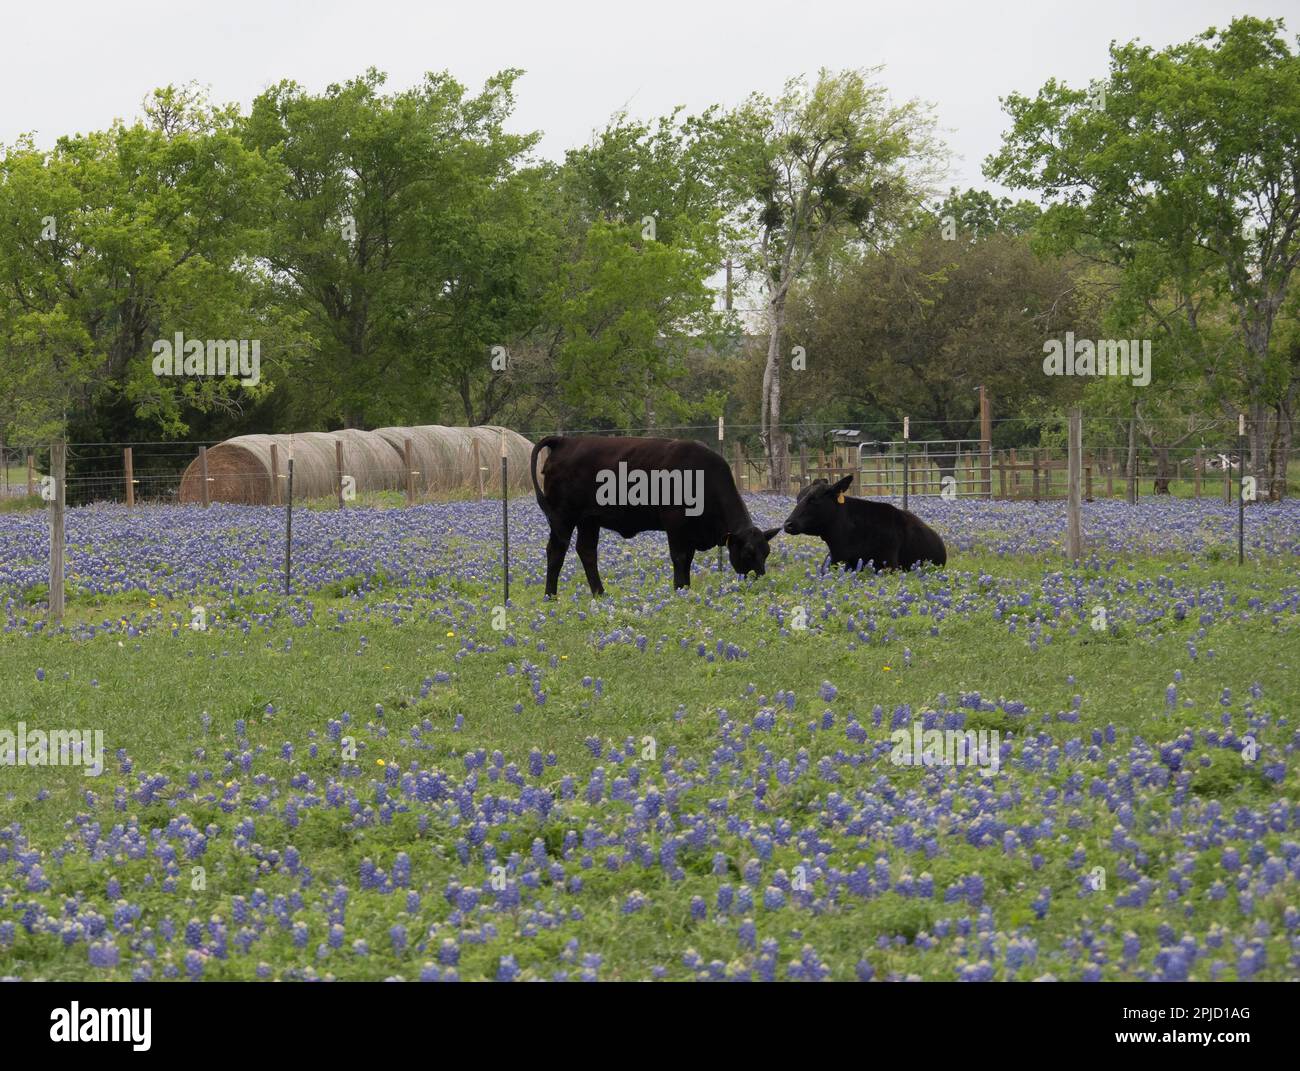 Two black angus cows in a field of bluebonnets with round hay bales in the background. Stock Photo